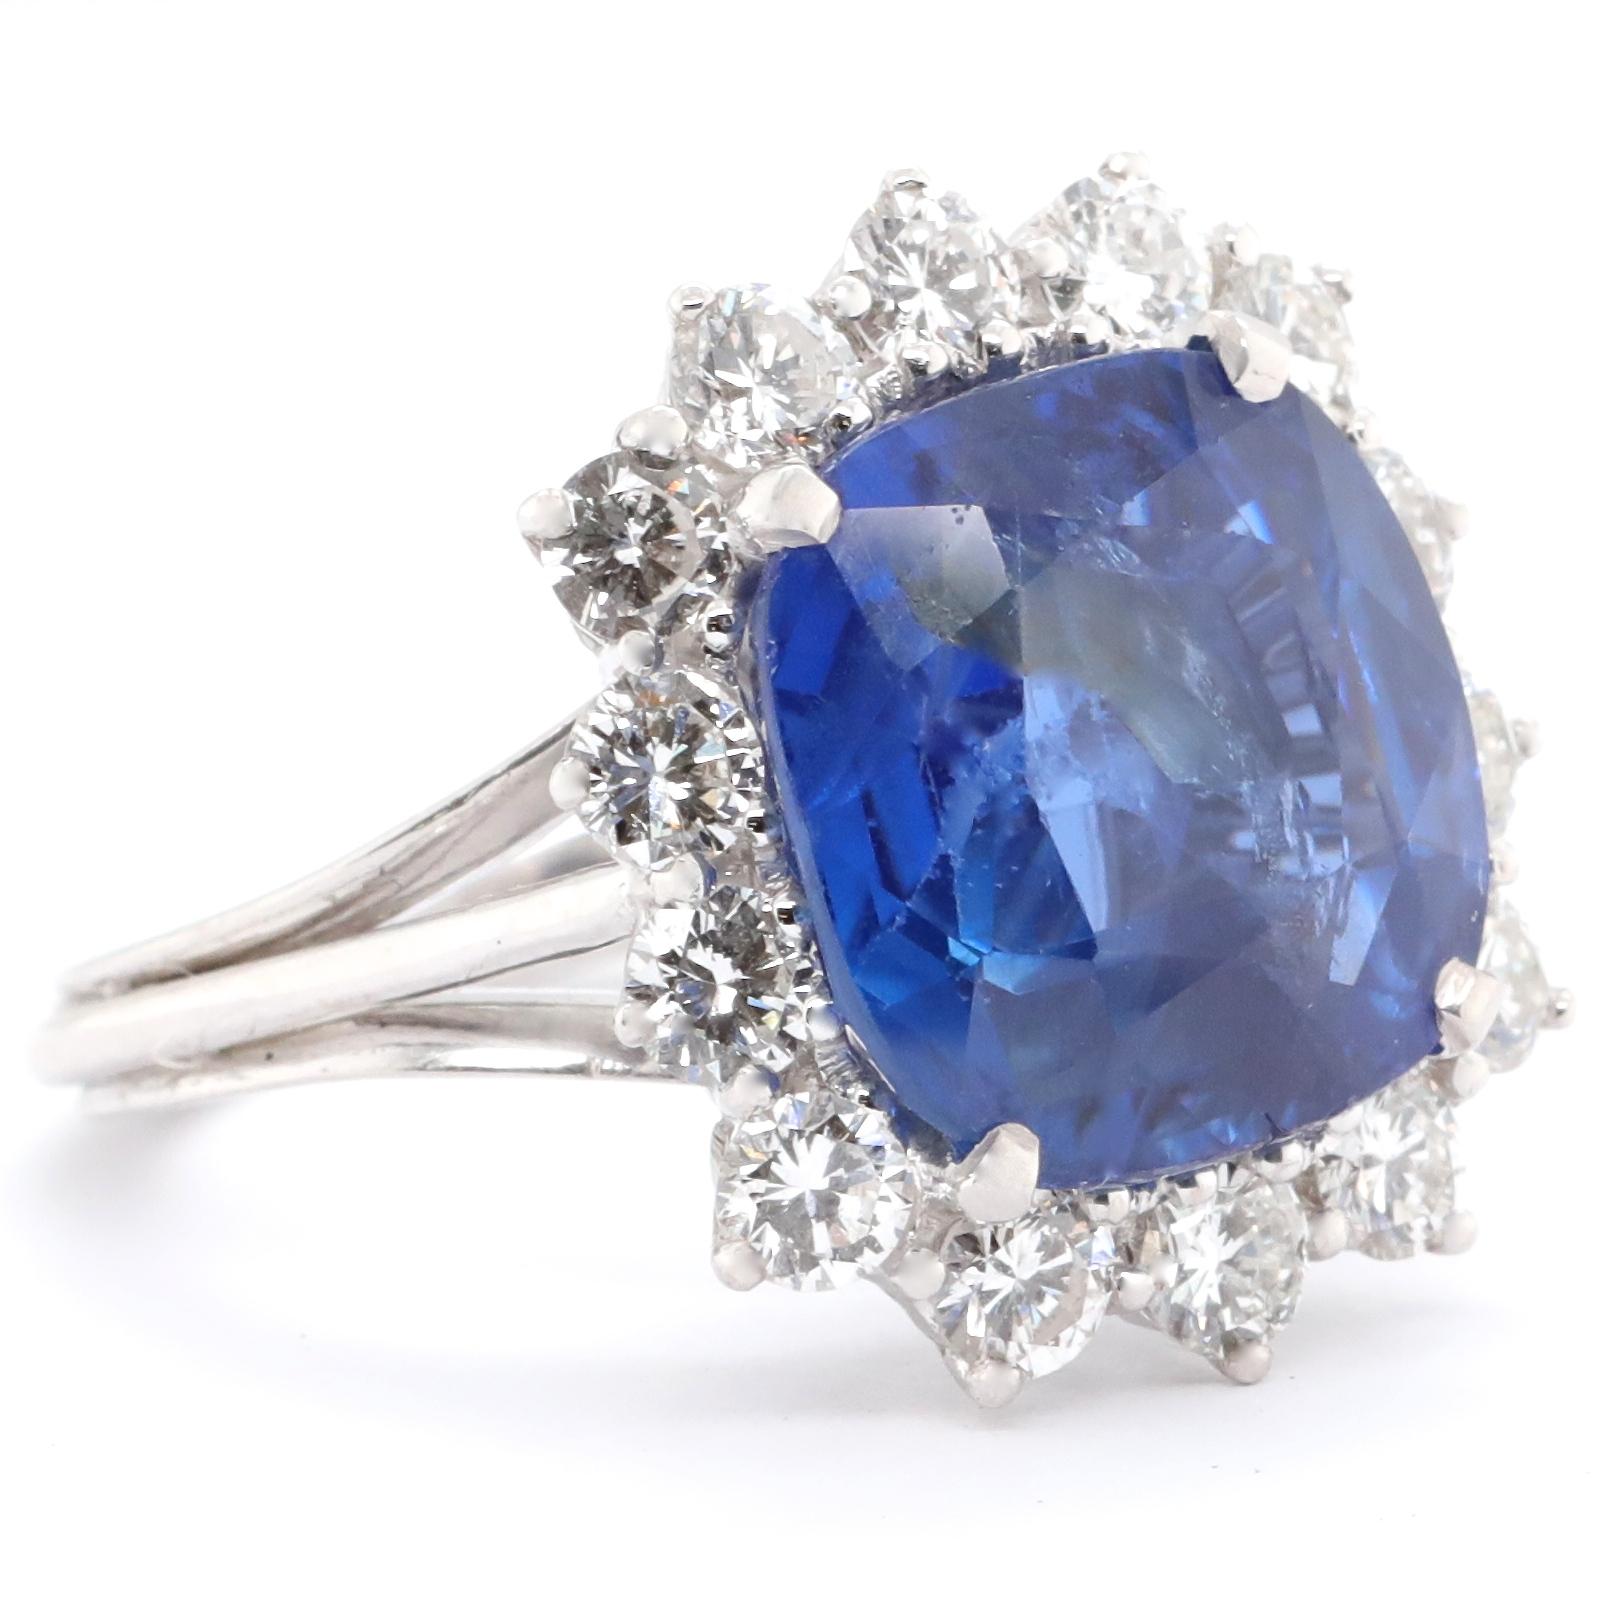 This ring just speaks ROYALTY. Something a princess might wear to a soiree. The center stone is AGL certified as 9.75 Carat Ceylon No Heat Sapphire. Graciously accompanied by 14 round brilliant cut diamonds approximately, 1.50 carat G-H color, VS